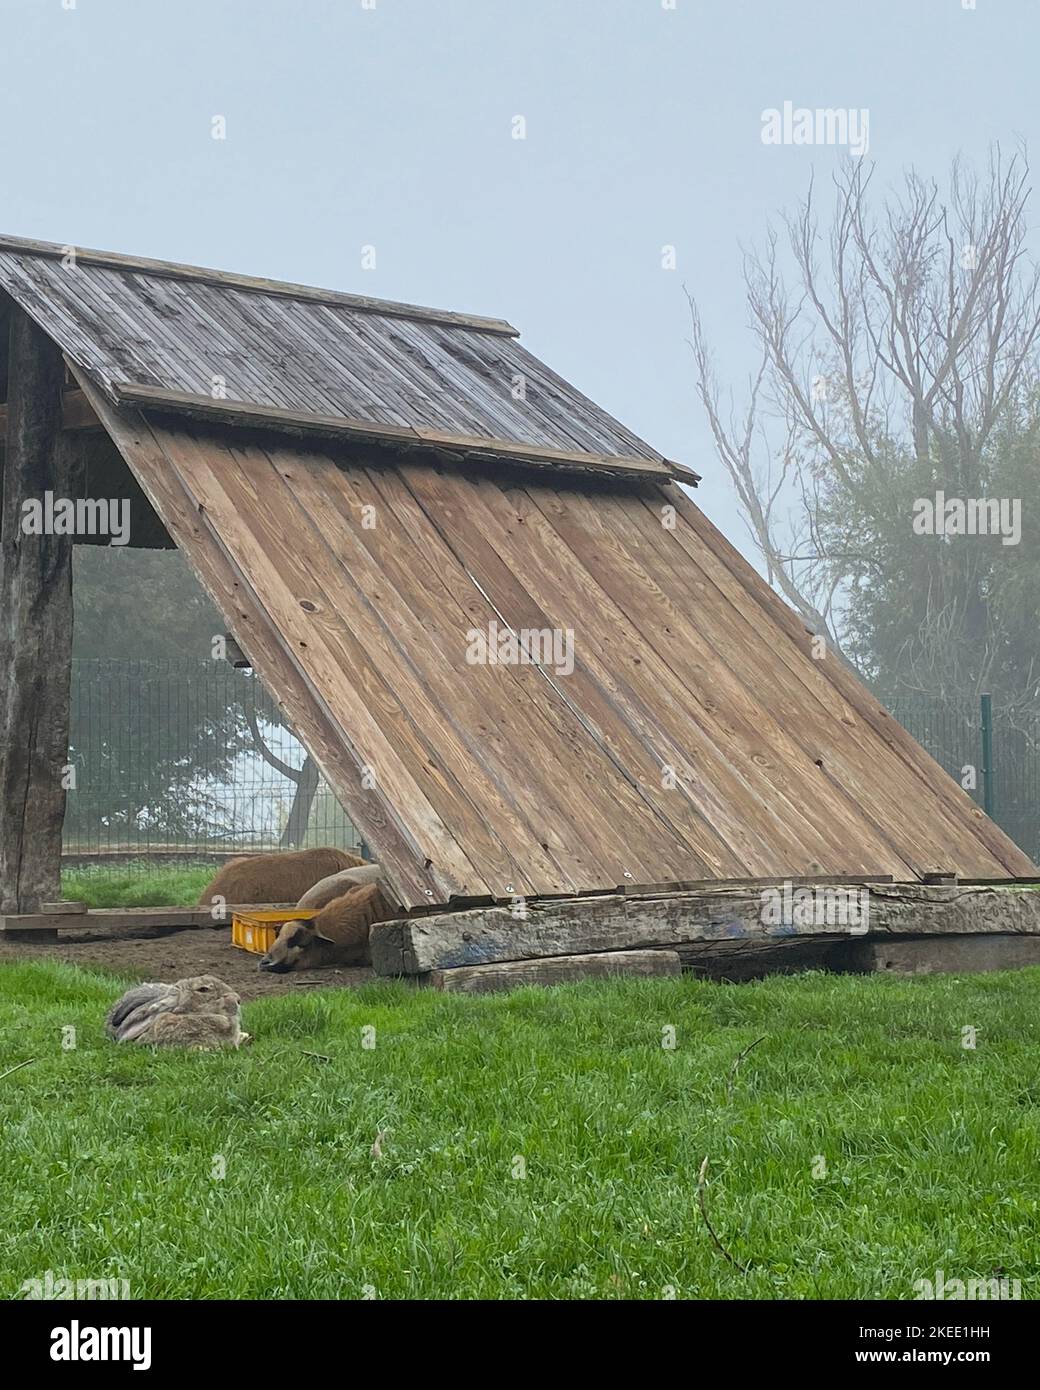 Animals grazing on green grass at farm grassland and behind wooden roof in a foggy day. Stock Photo